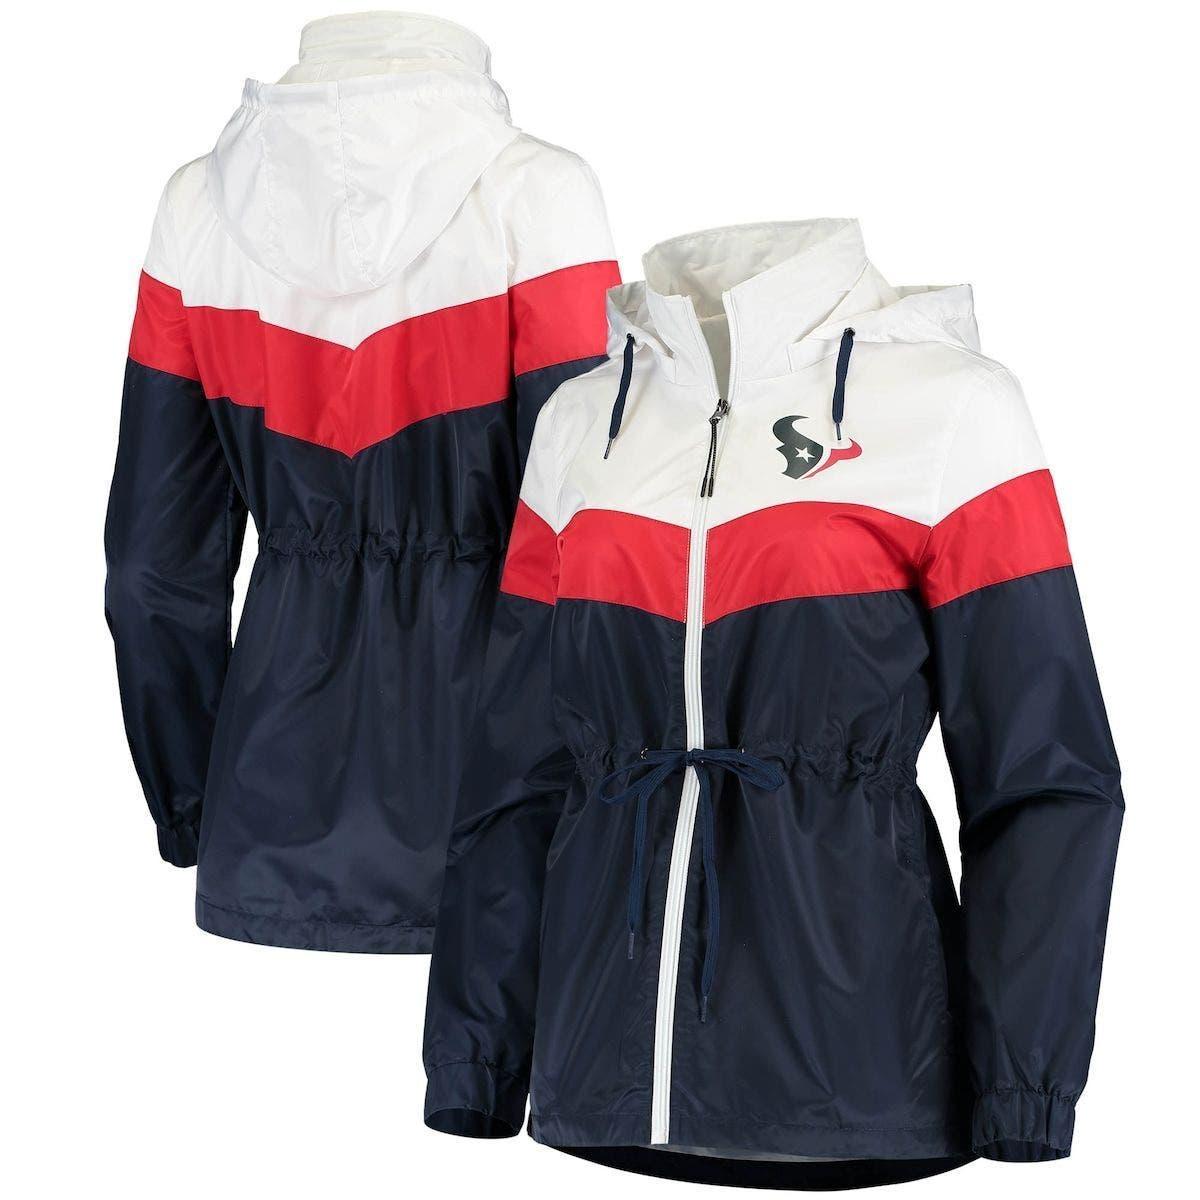 St. Louis Cardinals G-III 4Her by Carl Banks Women's Double Coverage  Full-Zip Hoodie Jacket - Red